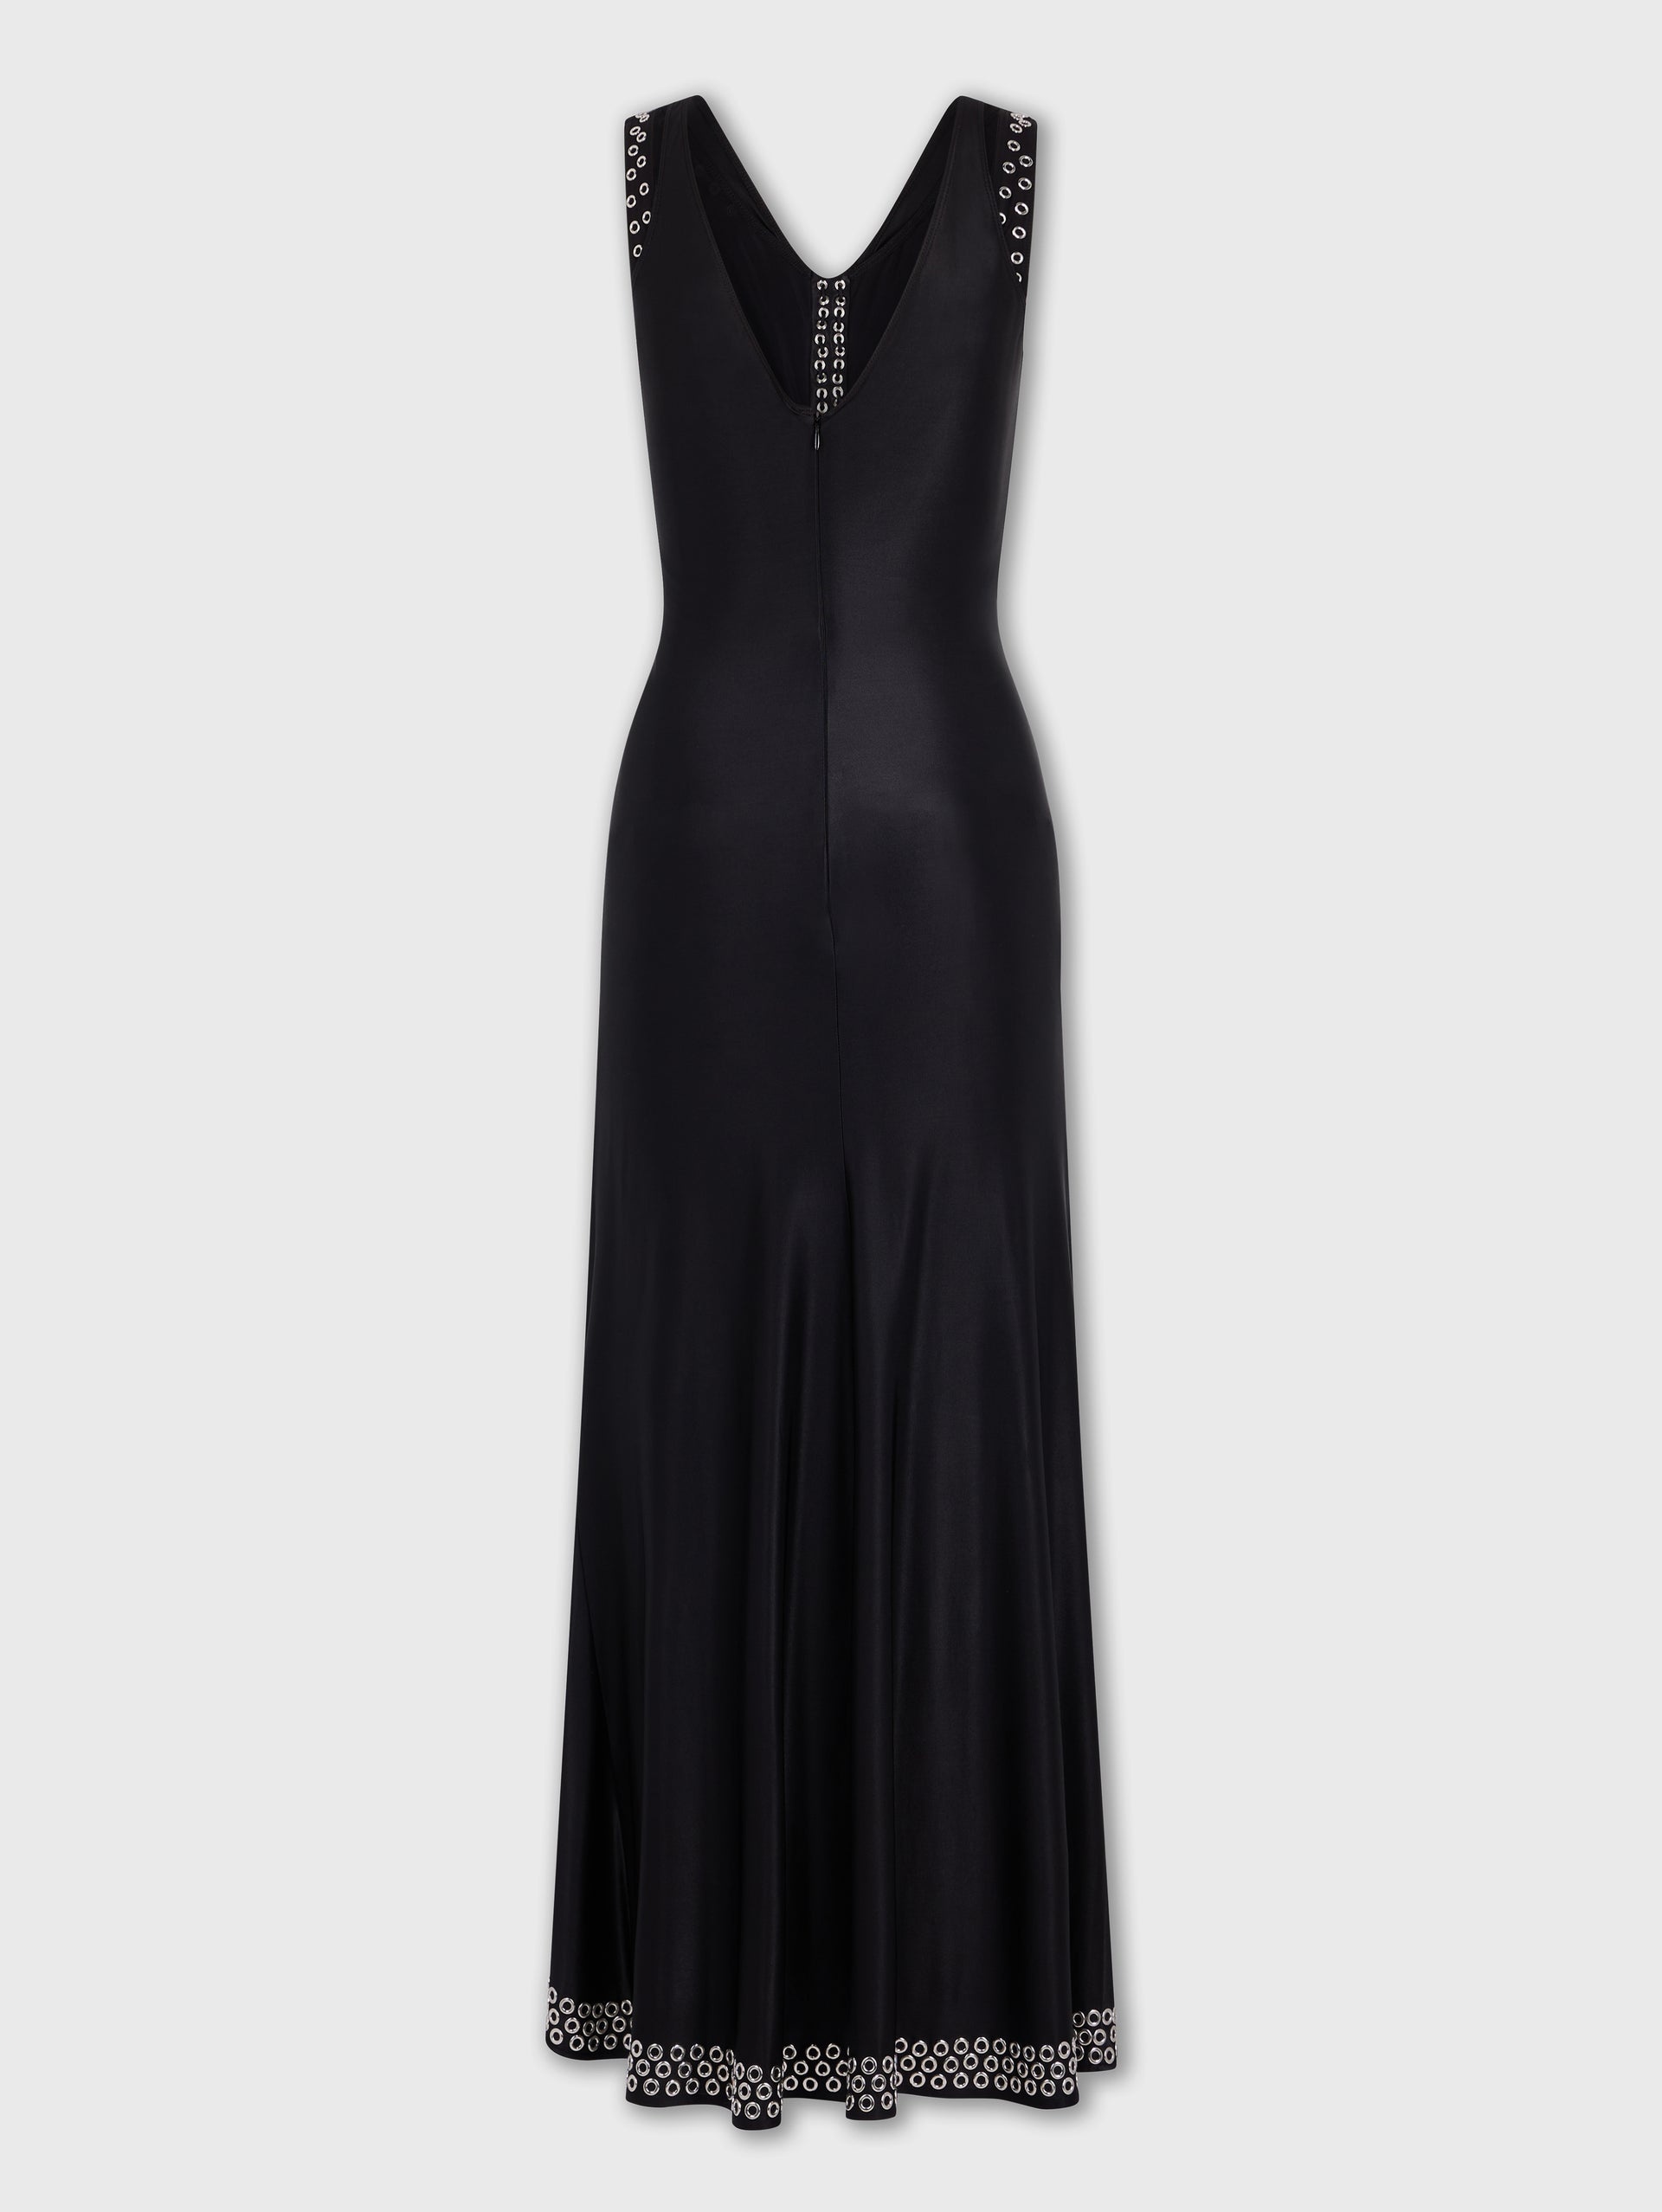 LONG BLACK DRESS WITH EMBROIDERED METALLIC EYELETS - 4